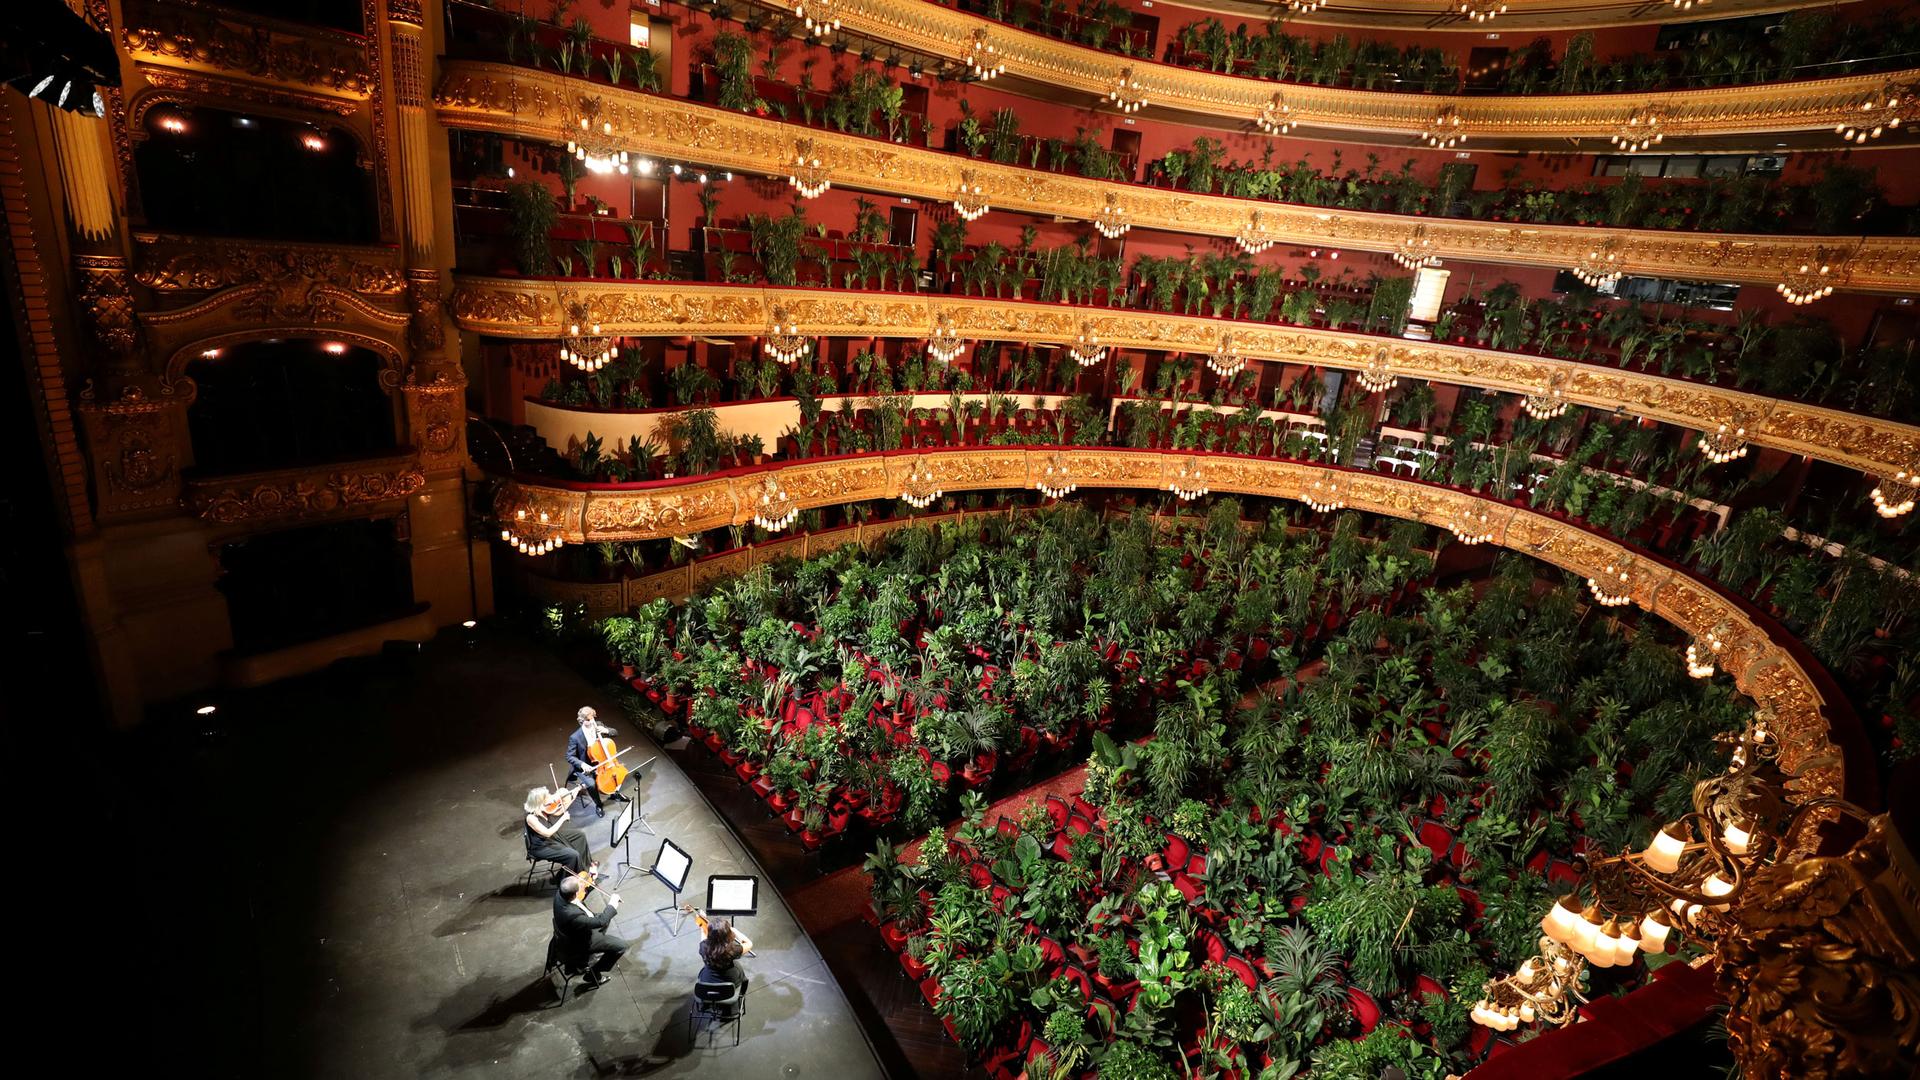 A theater is shown filled with potted plants in the chairs.